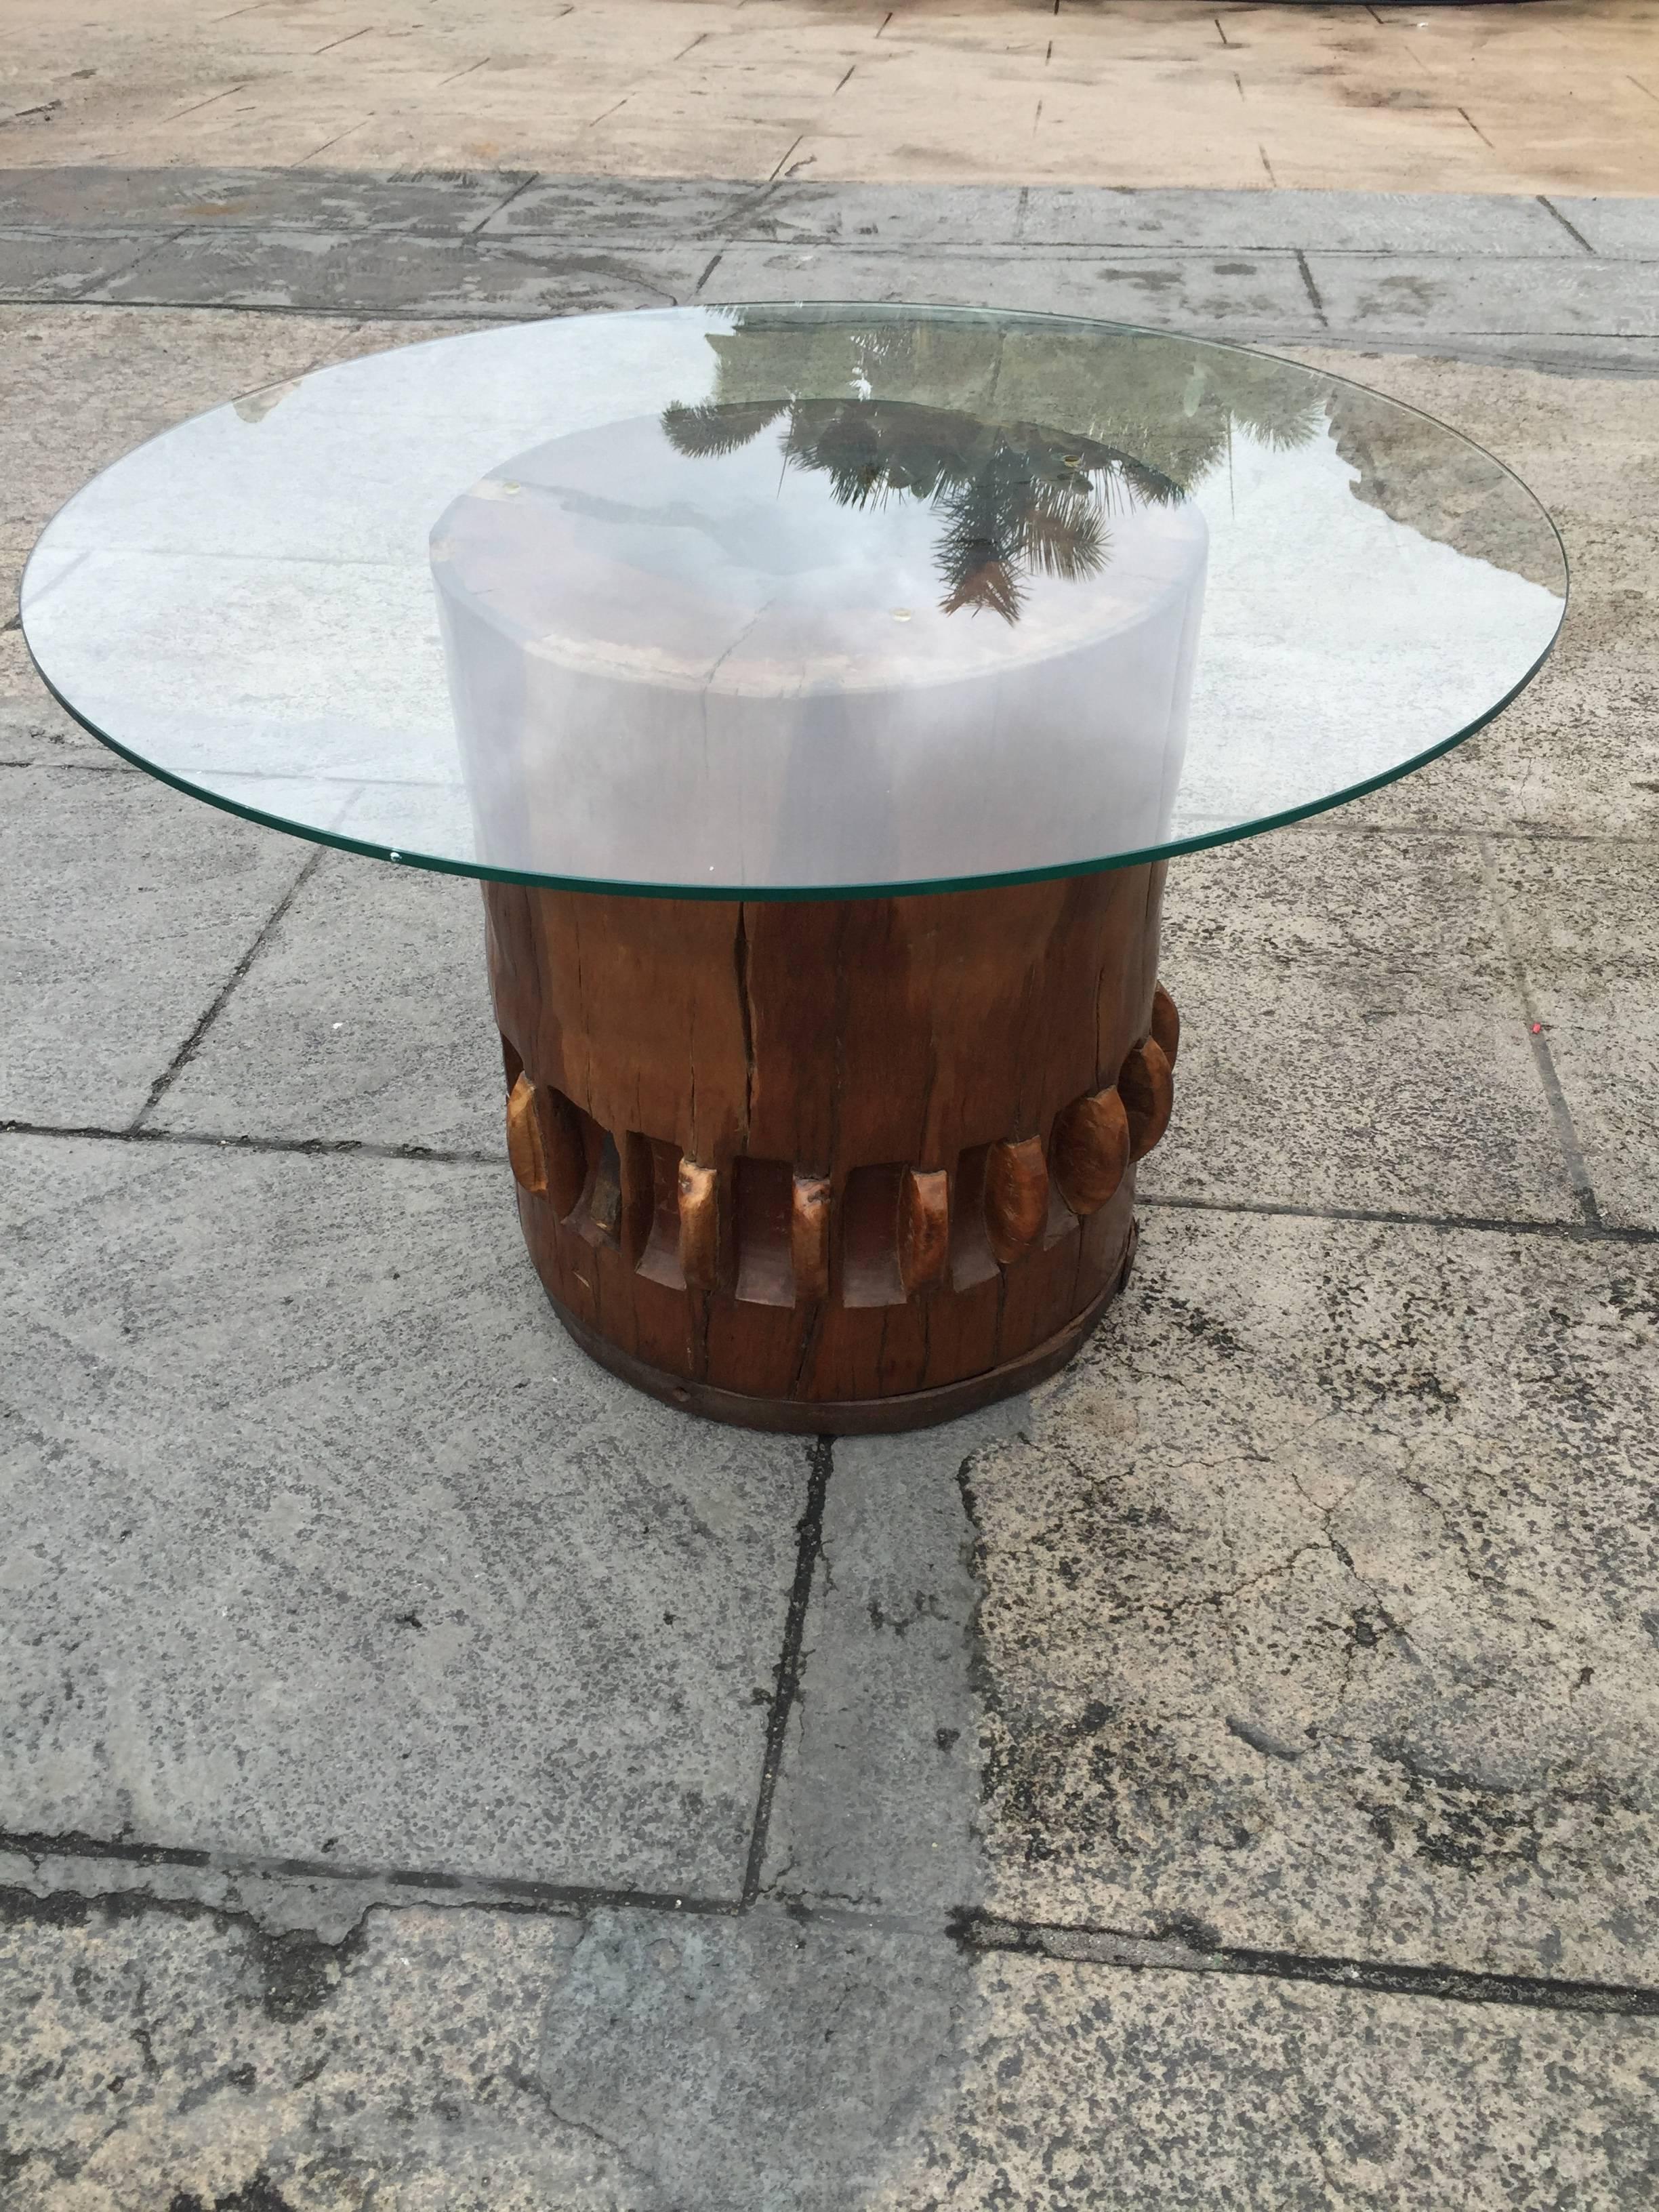 Solid wood gear or cog from a windmill repurposed into a table base. Could be used as a coffee or end table. Piece has been professionally refinished.